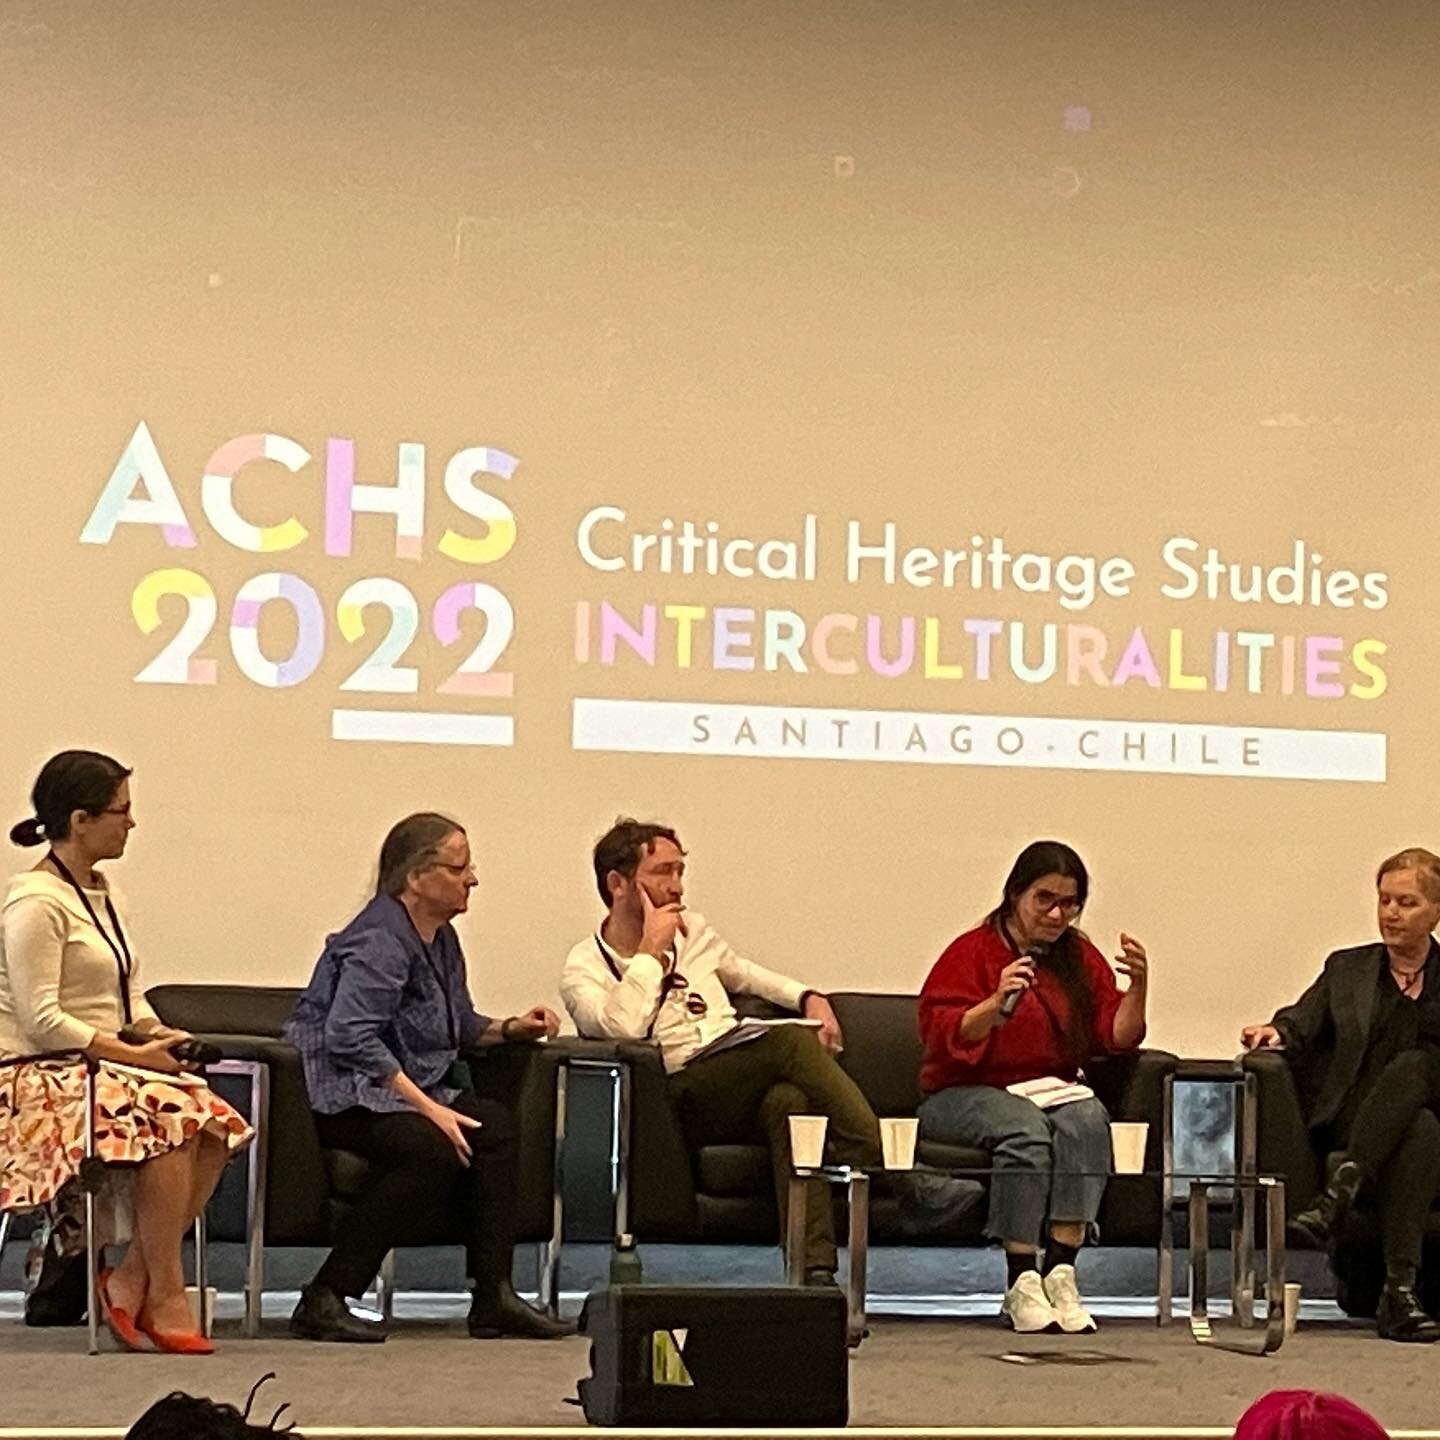 First day of the ACHS conference. Paper presented so can now relax and enjoy the other sessions. Very interesting, sometimes quite emotional and occasionally heated discussions regarding cultural heritage, identities, climate change &hellip; Mark of 